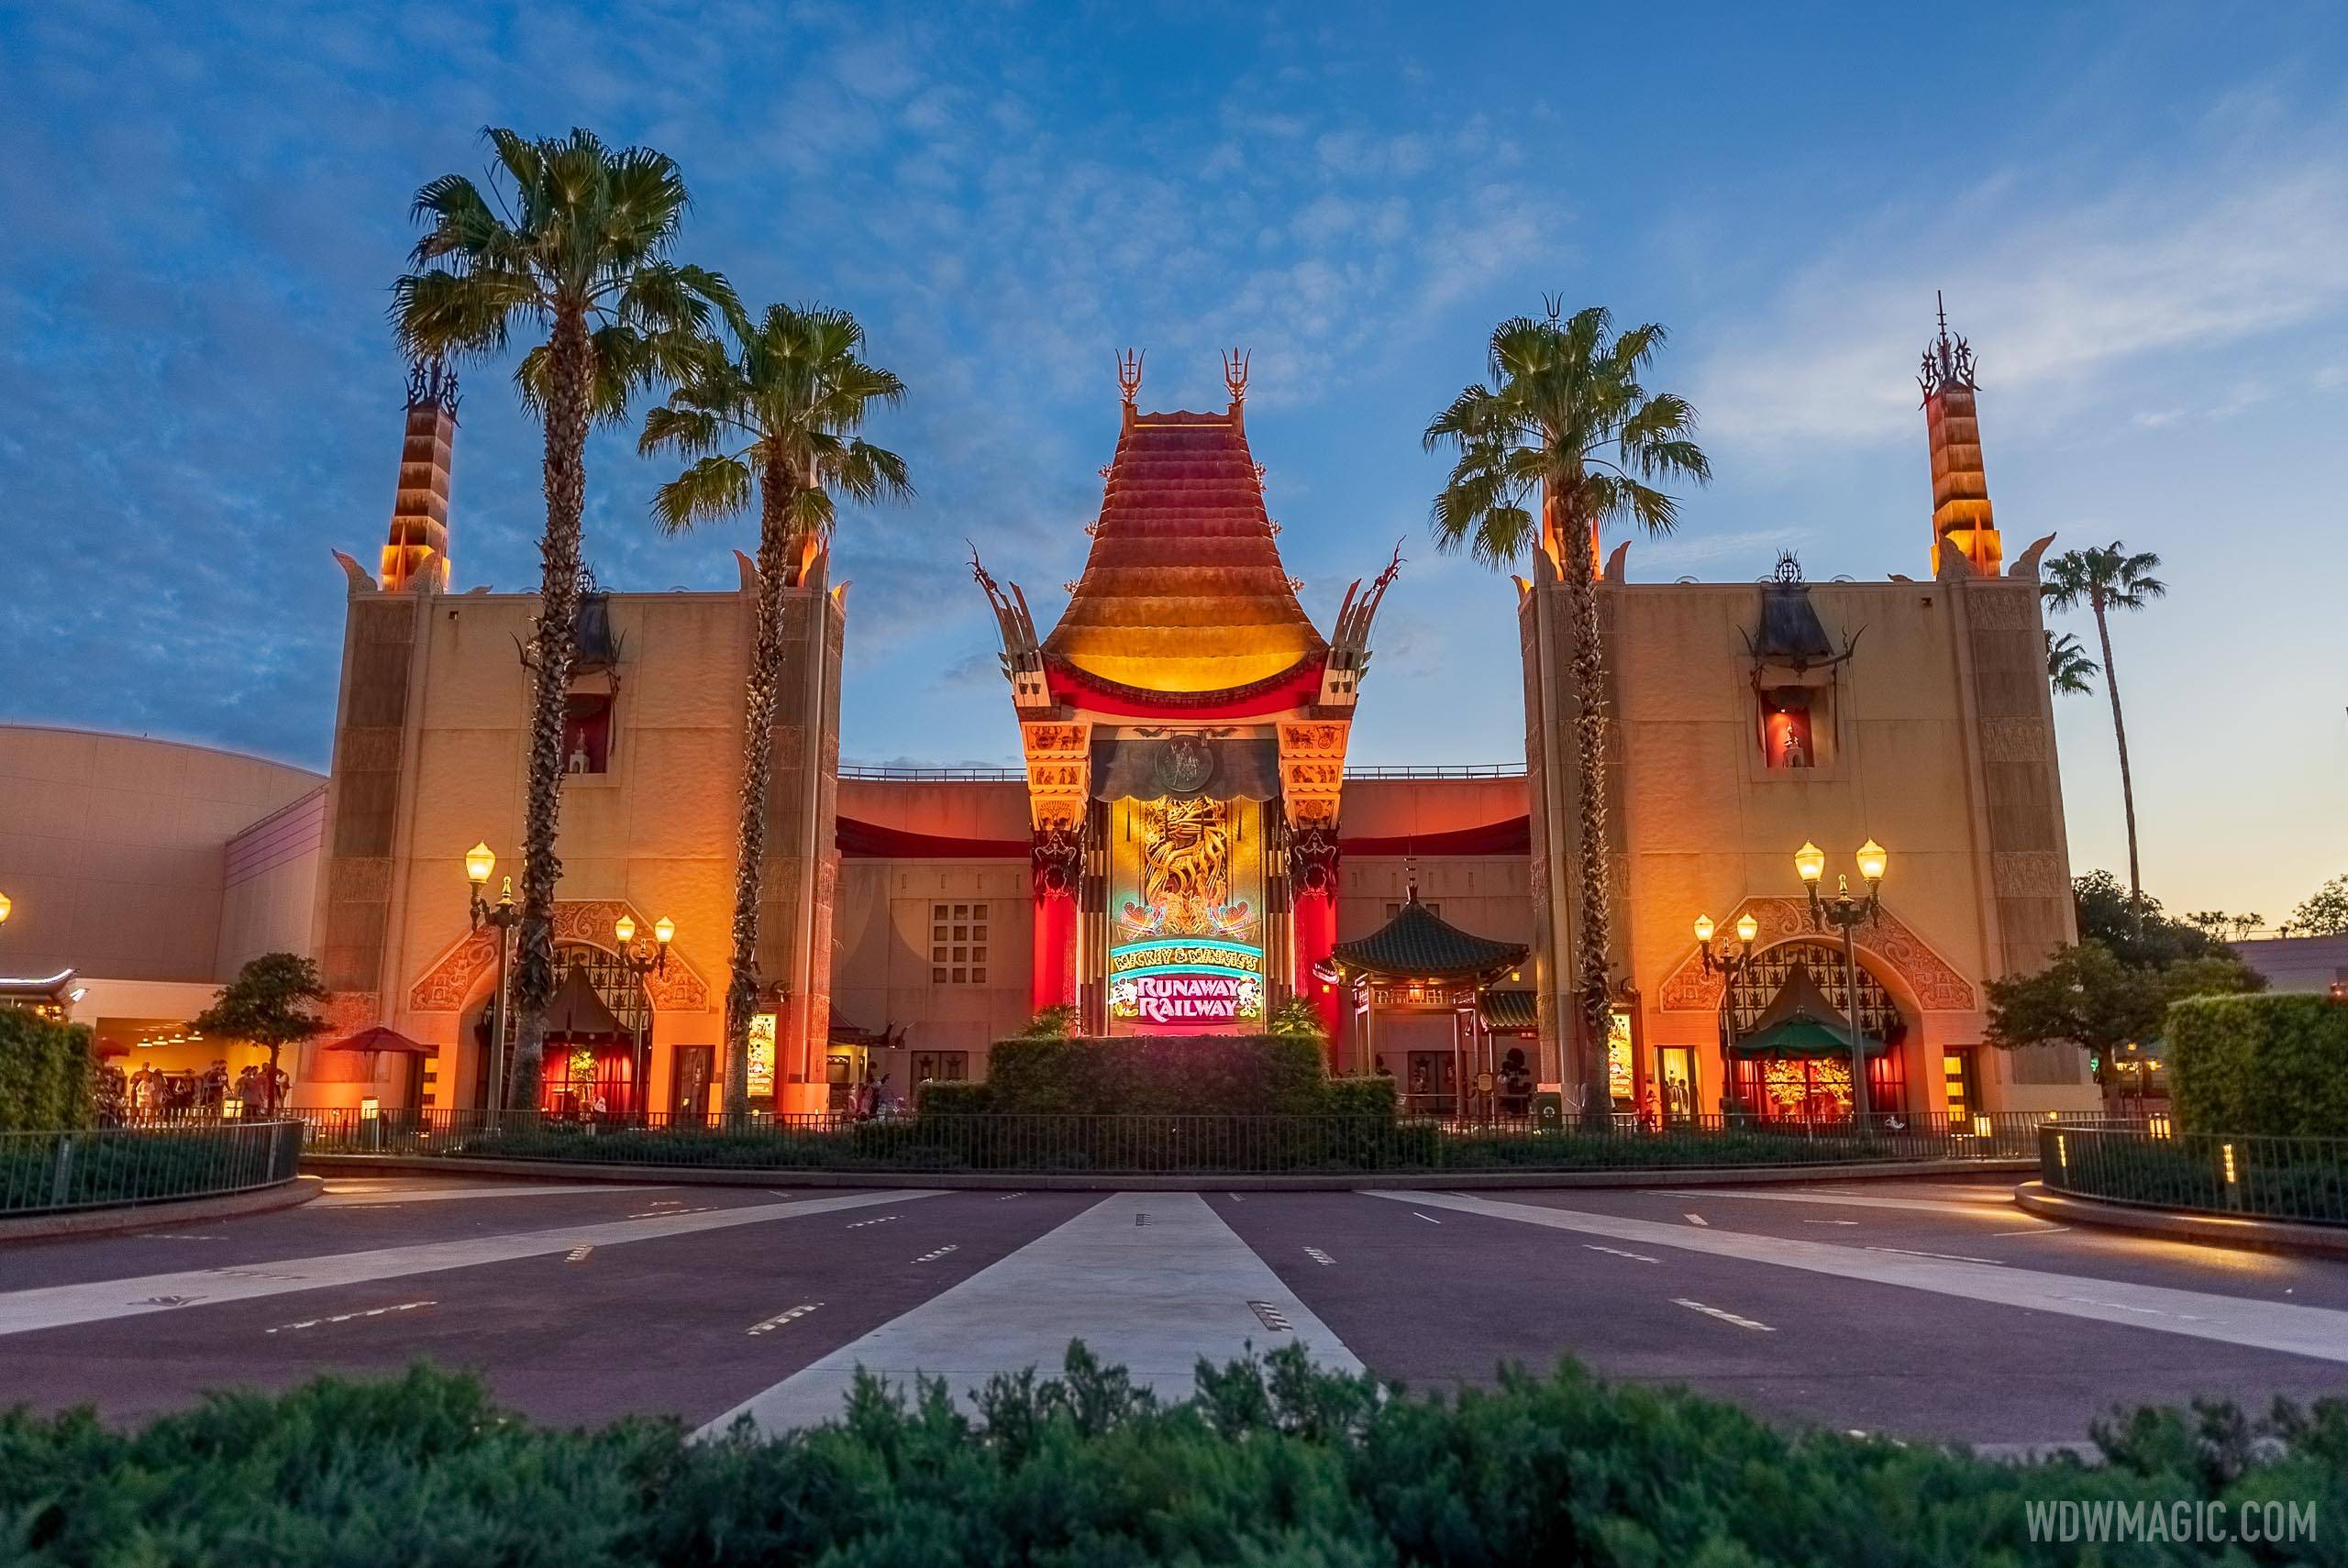 Maroon 5 to Headline Private Event at Disney's Hollywood Studios